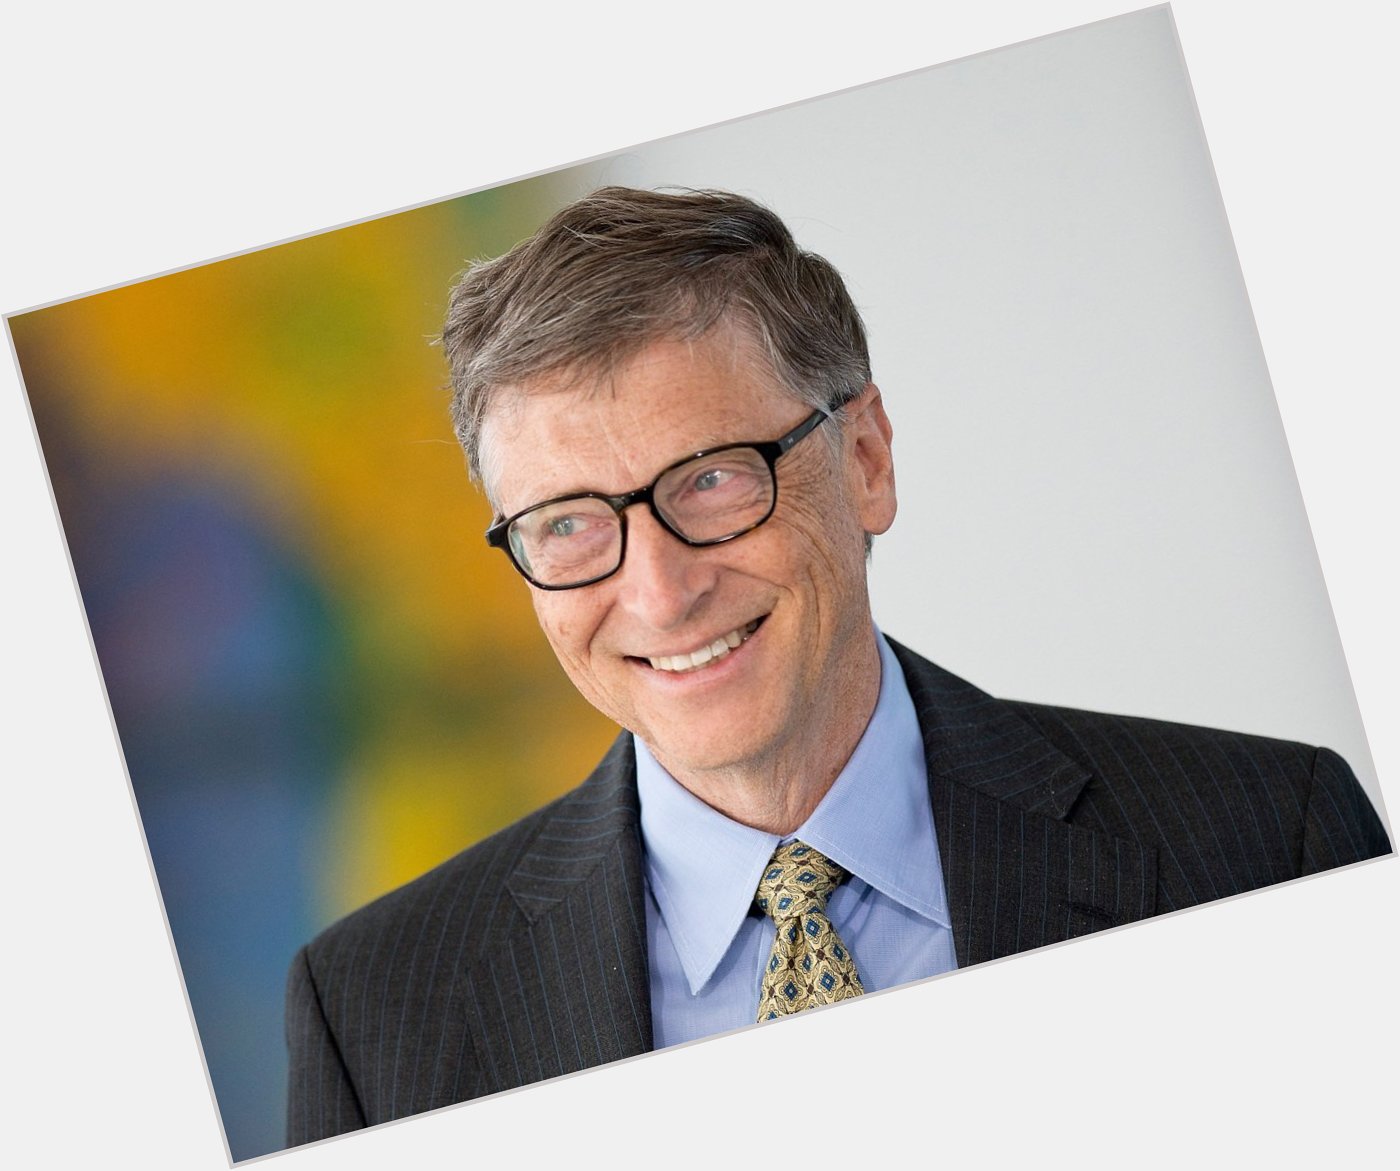 Happy Birthday to Bill Gates  philanthropist, computer programmer, and inventor, co-founded Microsoft (60) 